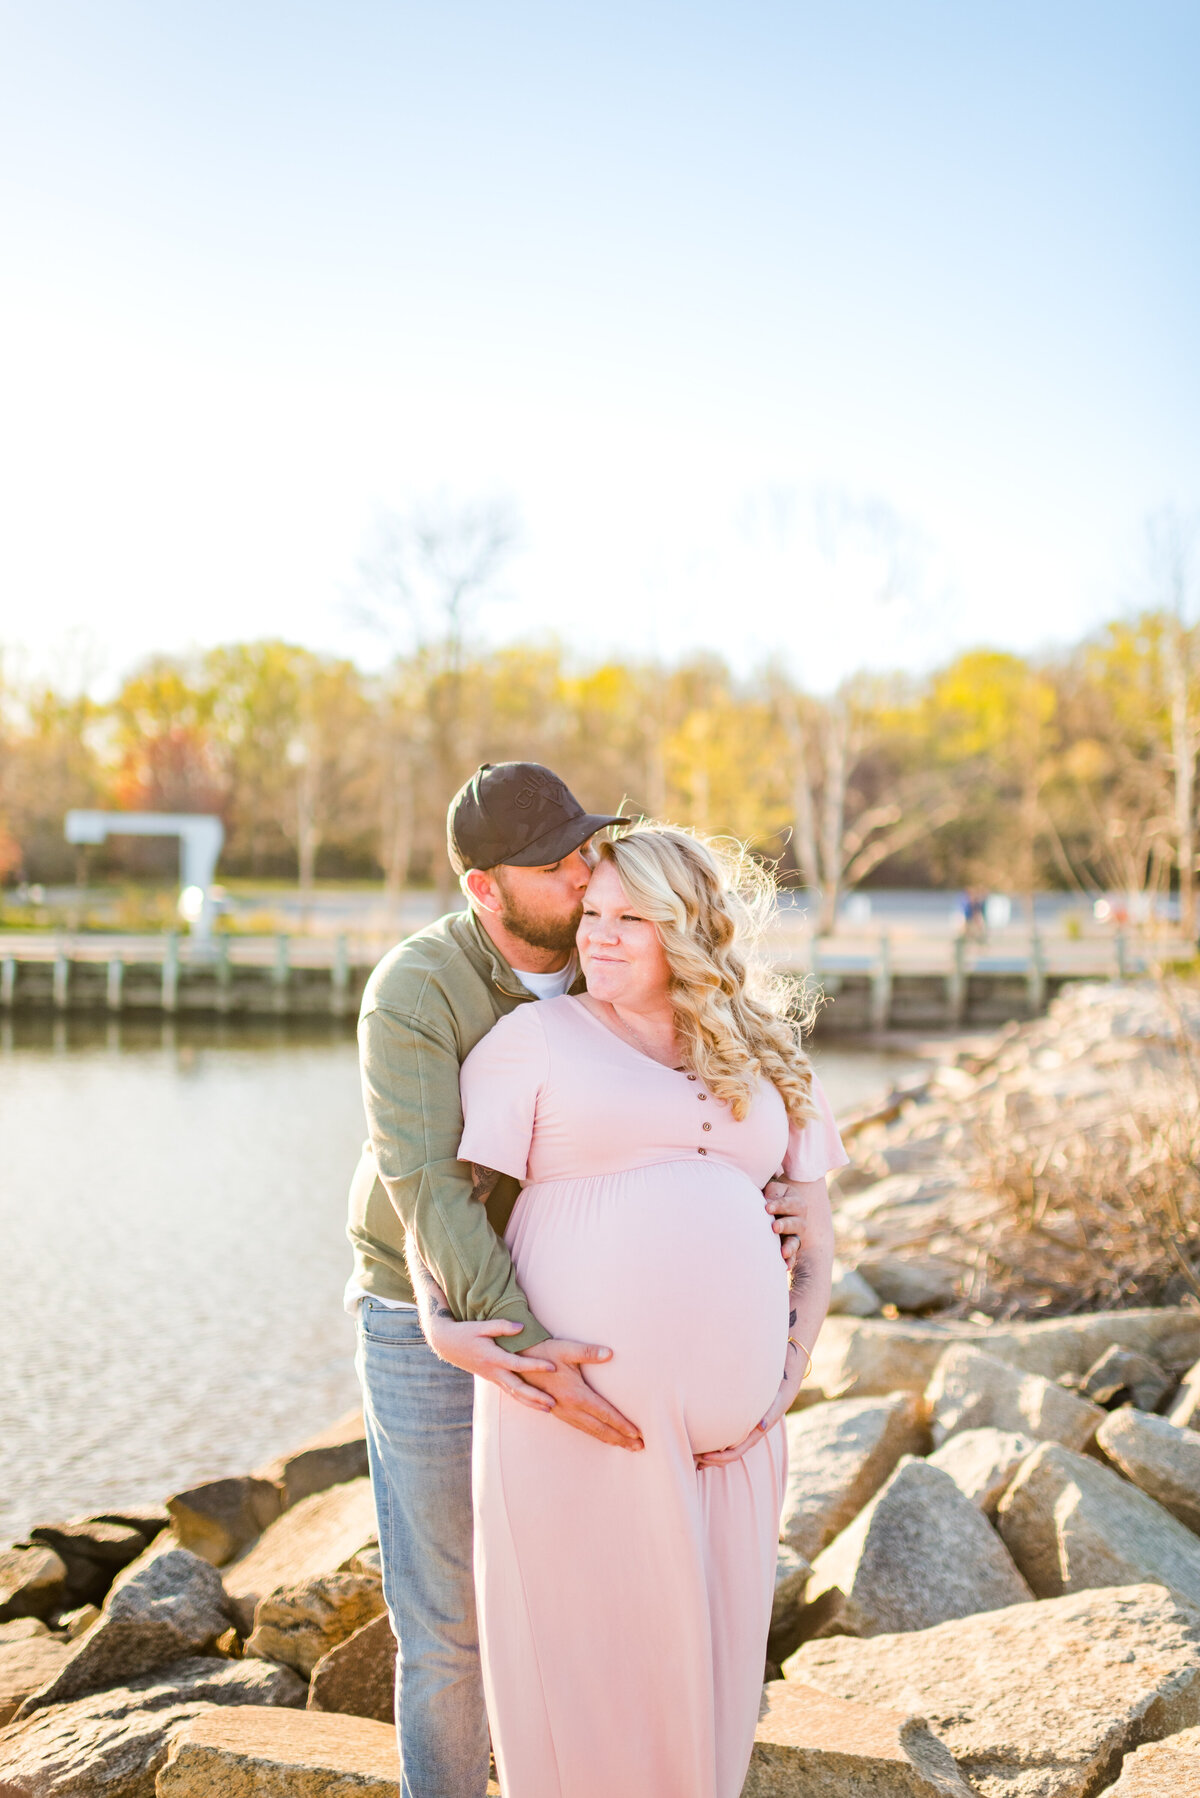 Ashley + Cory Maternity Session - Photography by Gerri Anna-19